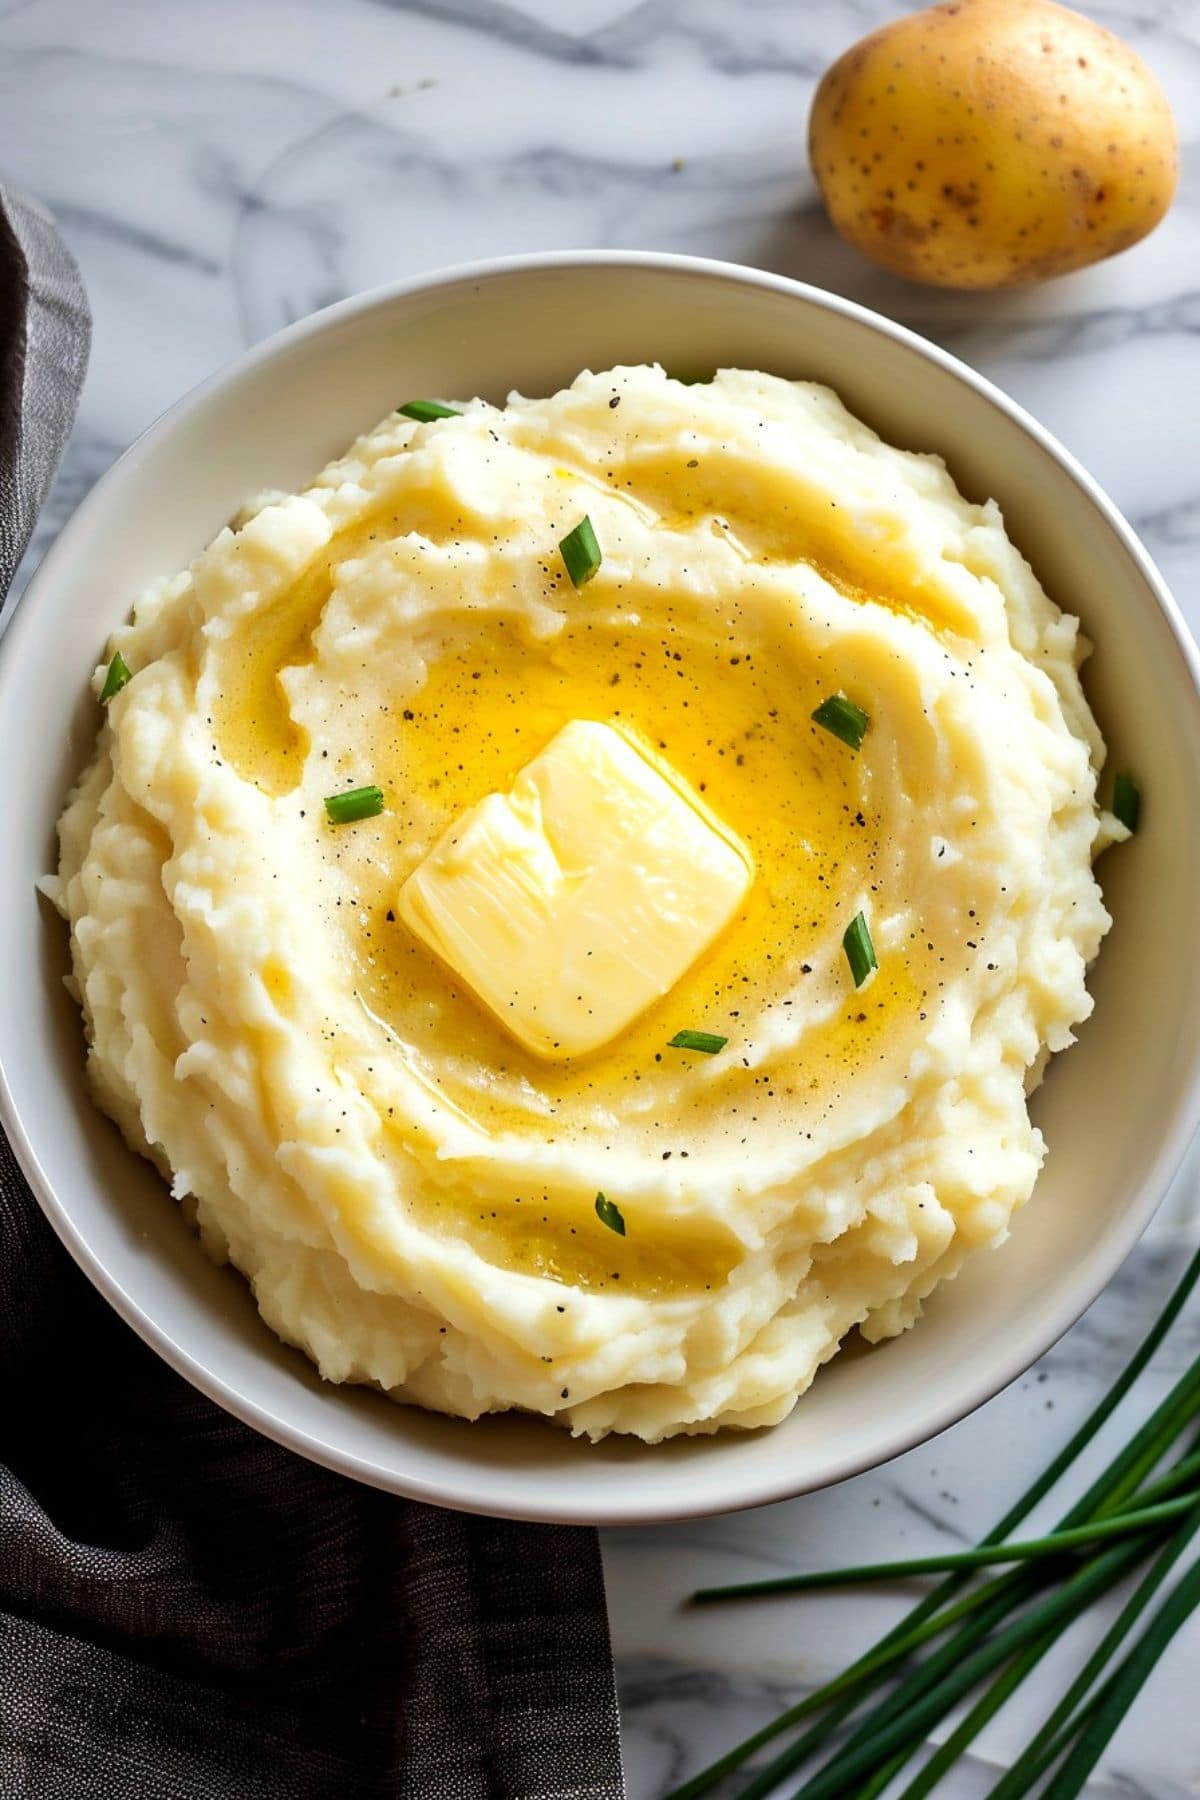 Mashed potatoes topped with melted butter and sprinkled with chives, creating a savory and flavorful side dish